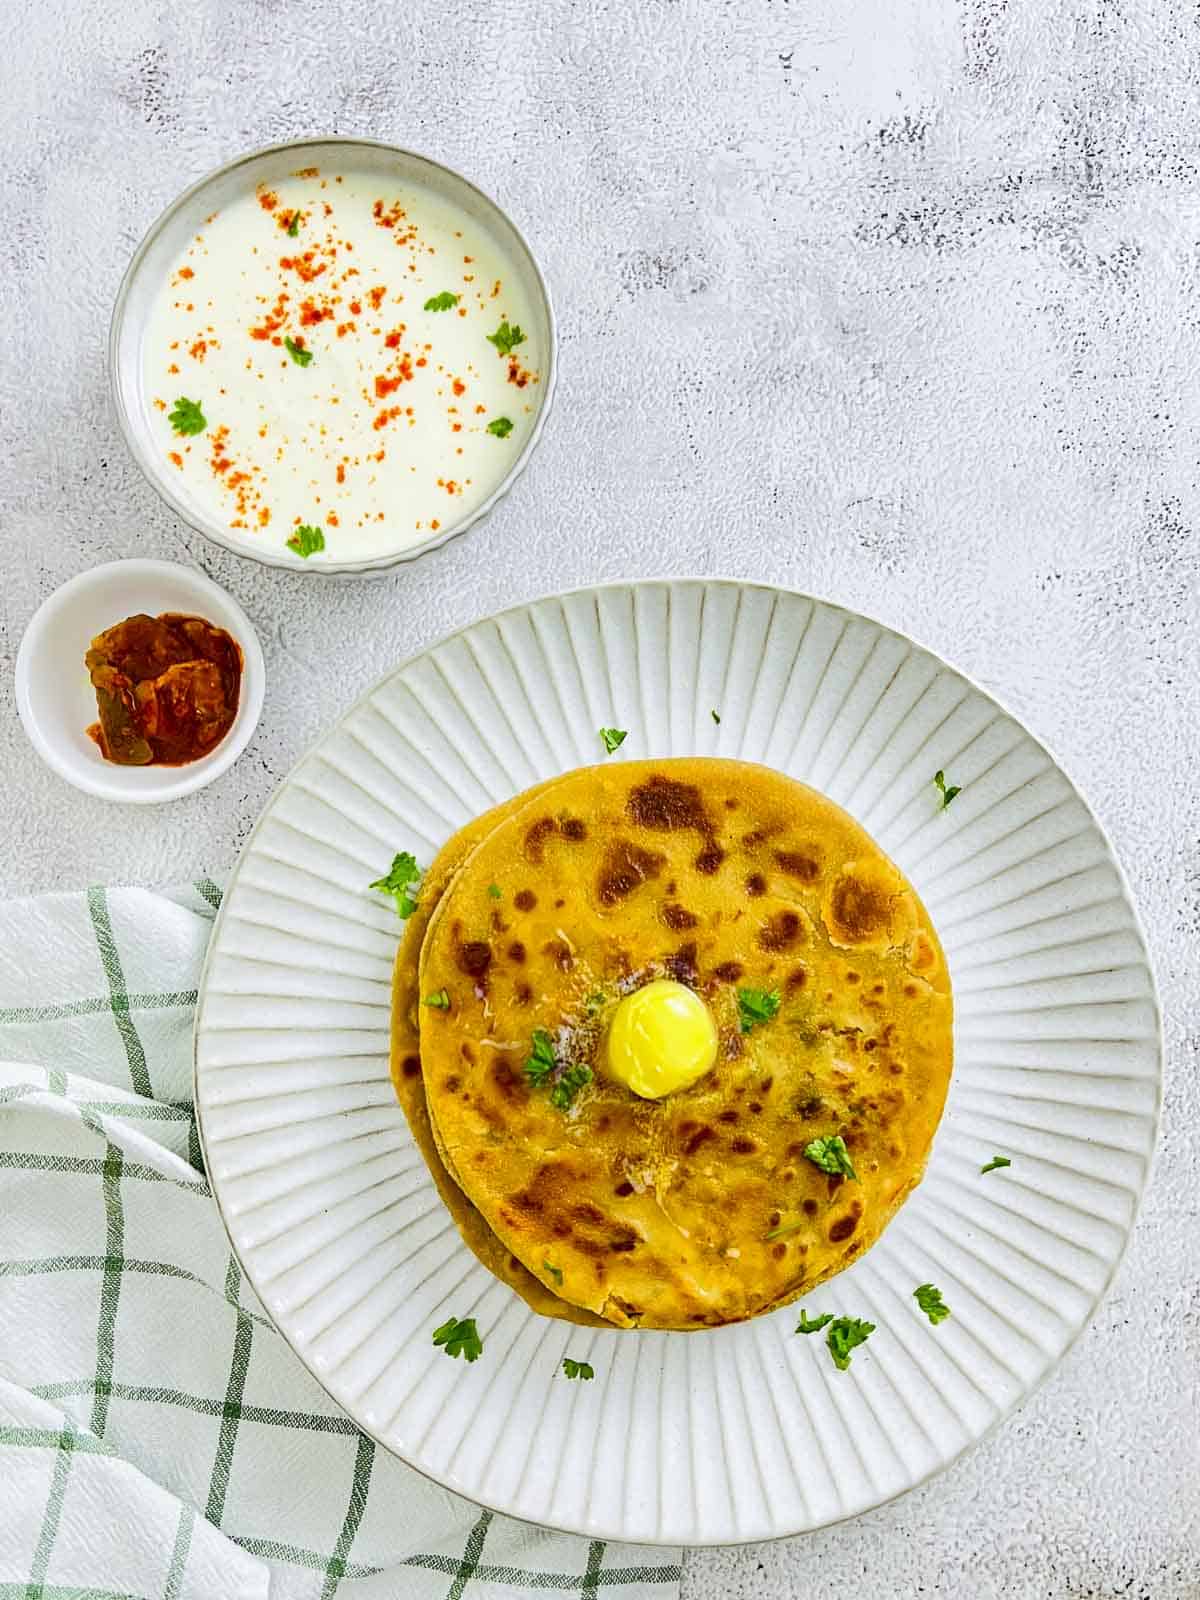 Aloo paratha topped with butter and served with yogurt and pickle.